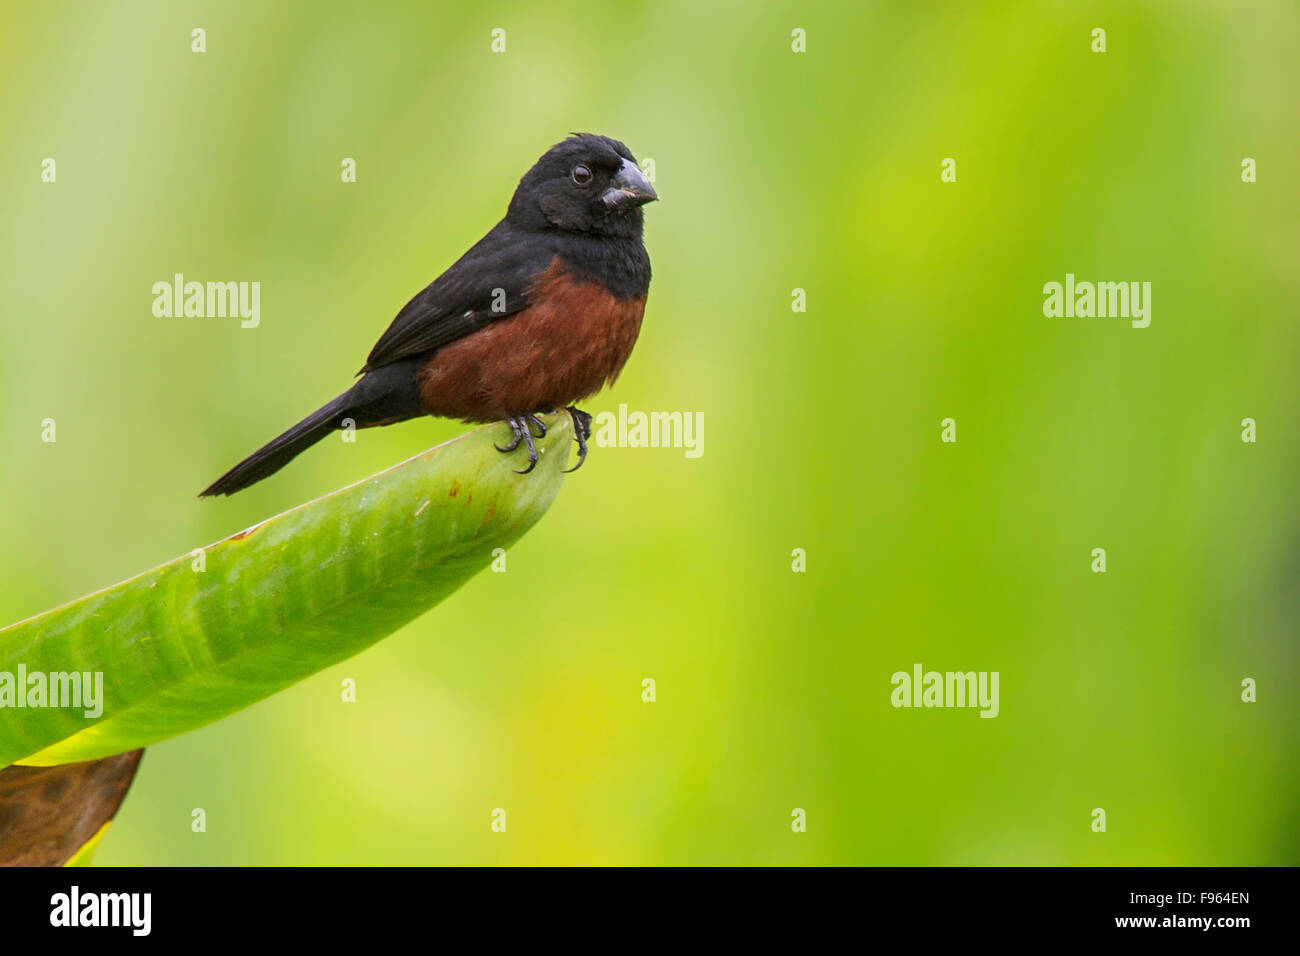 Chestnutbellied Seed Finch (Oryzoborus angolensis) perched on a branch in Manu National Park, Peru. Stock Photo